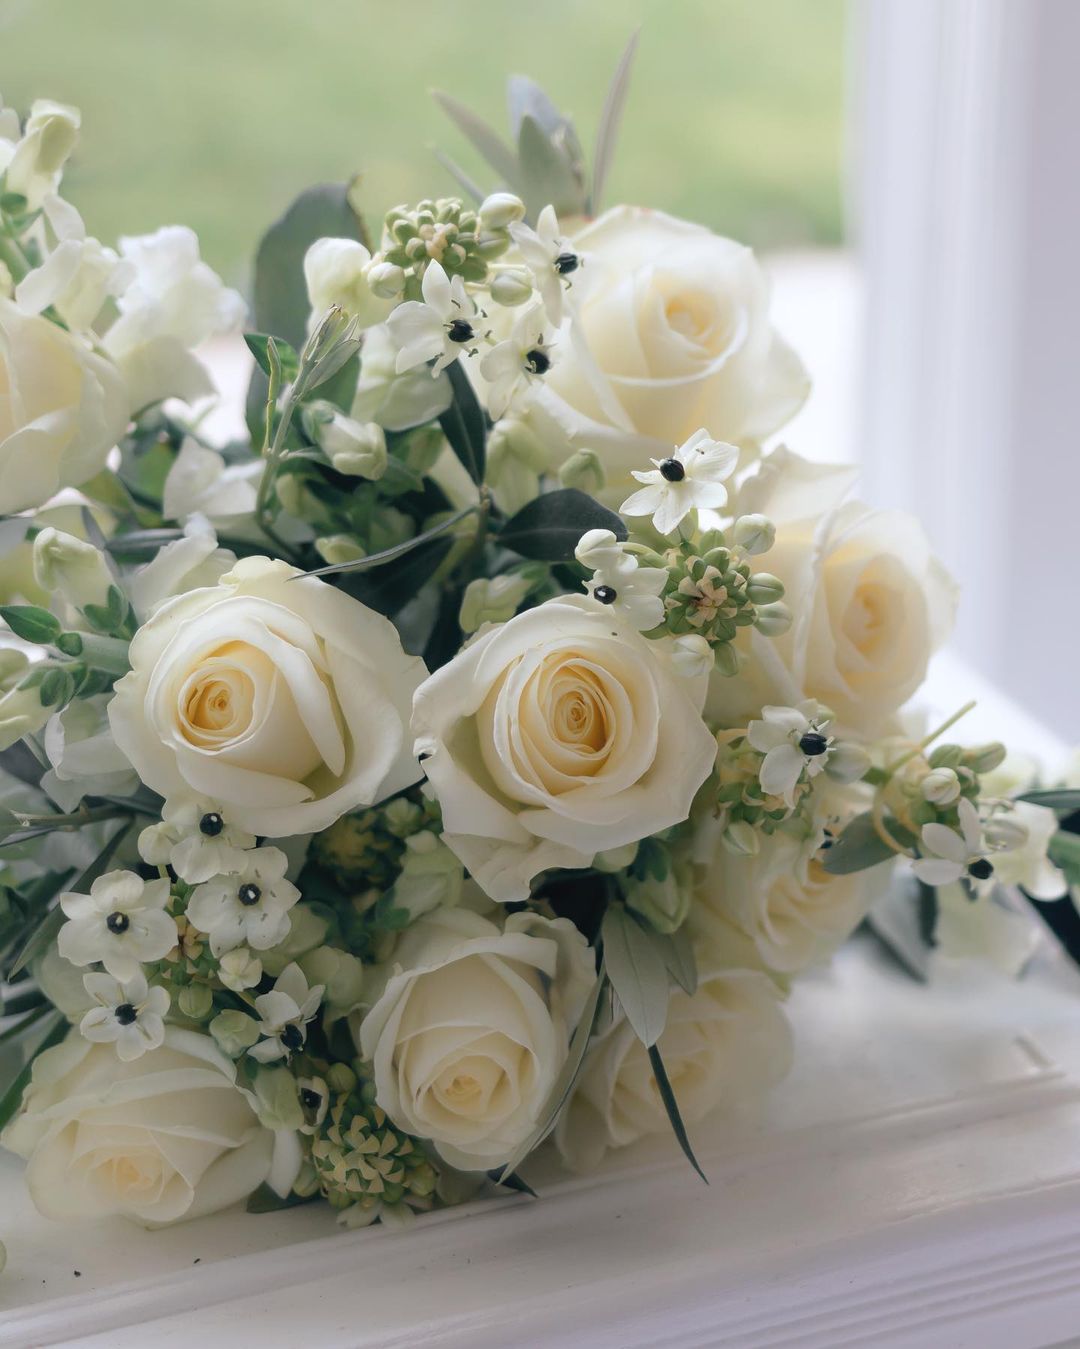 These Are The Best White Roses For Christmas003